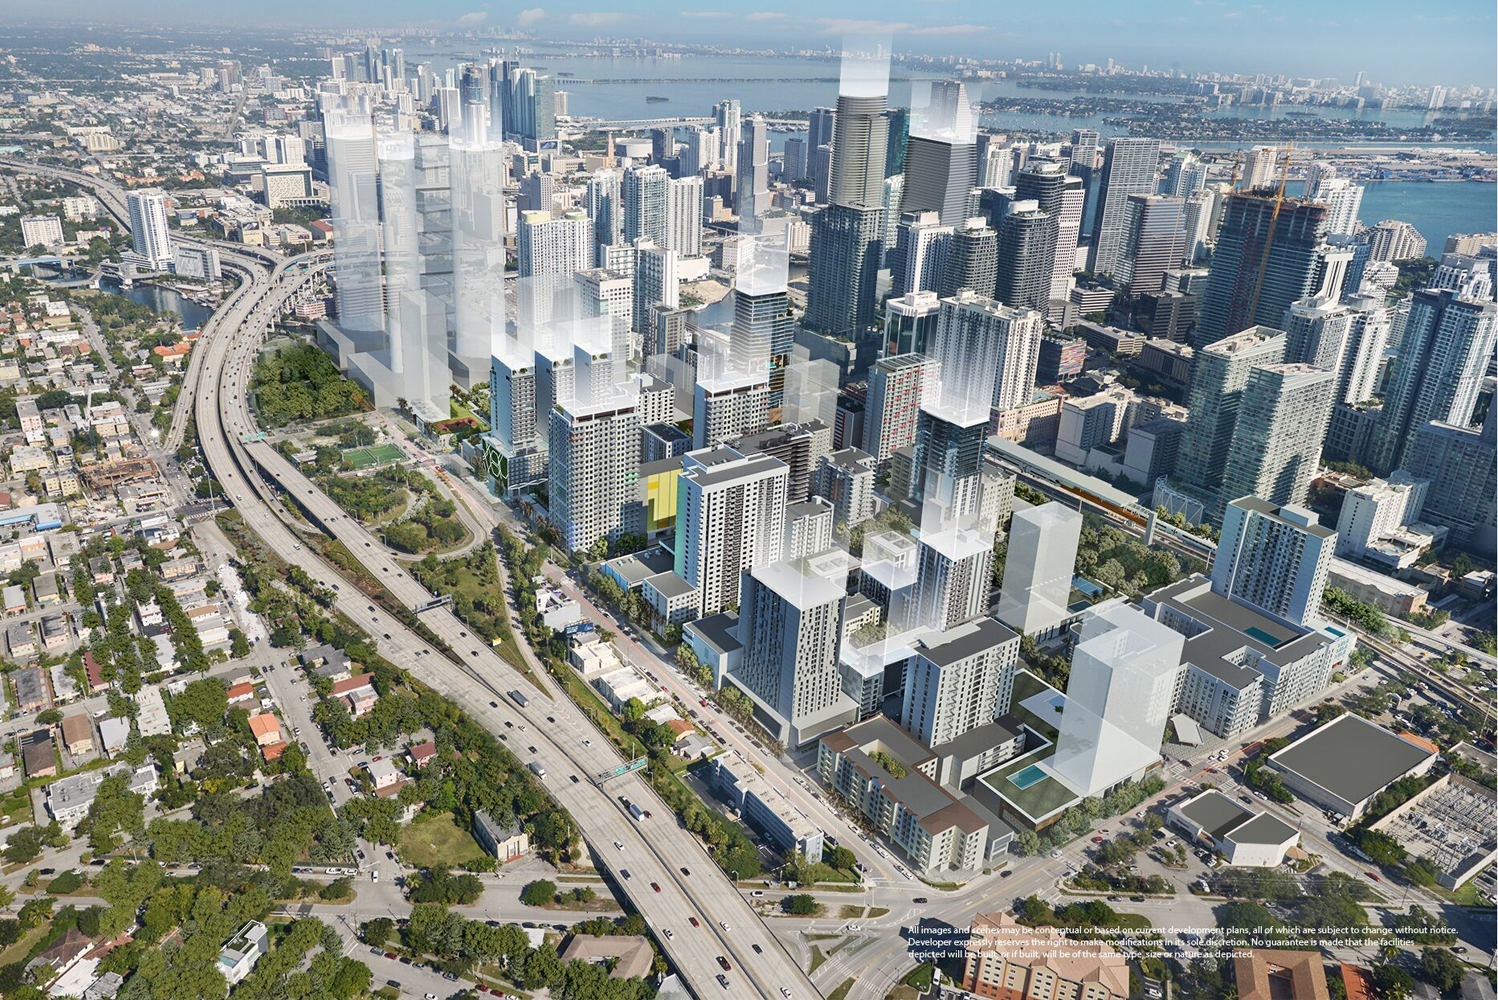 Smart Brickell eyes 2021completion as mixed-use hotel and residential project